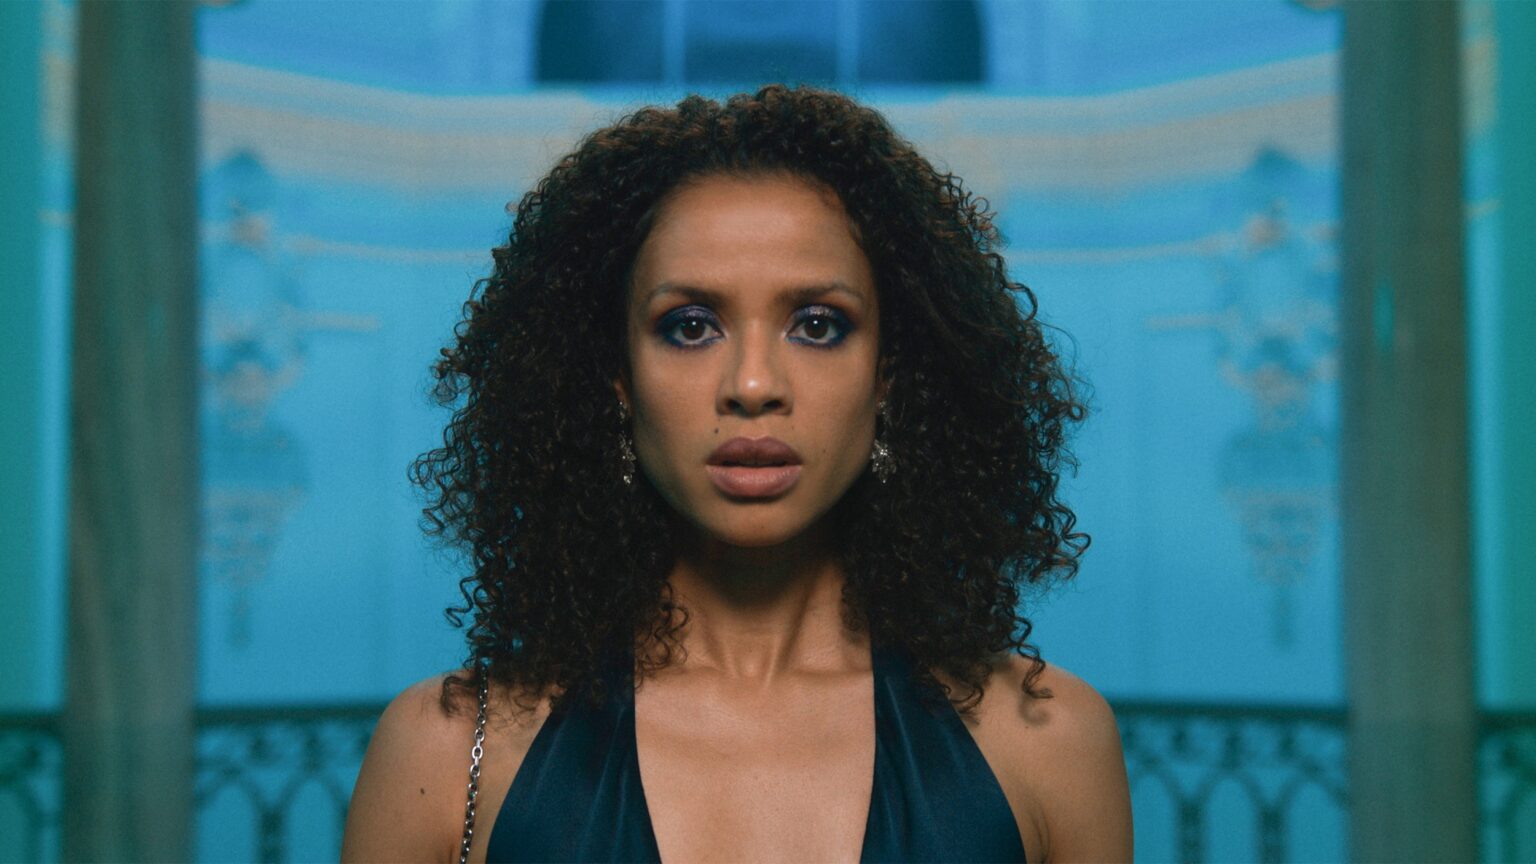 Surface recap Apple TV+: Sophie (played by Gugu Mbatha-Raw) isn't who, or what, we thought after all.